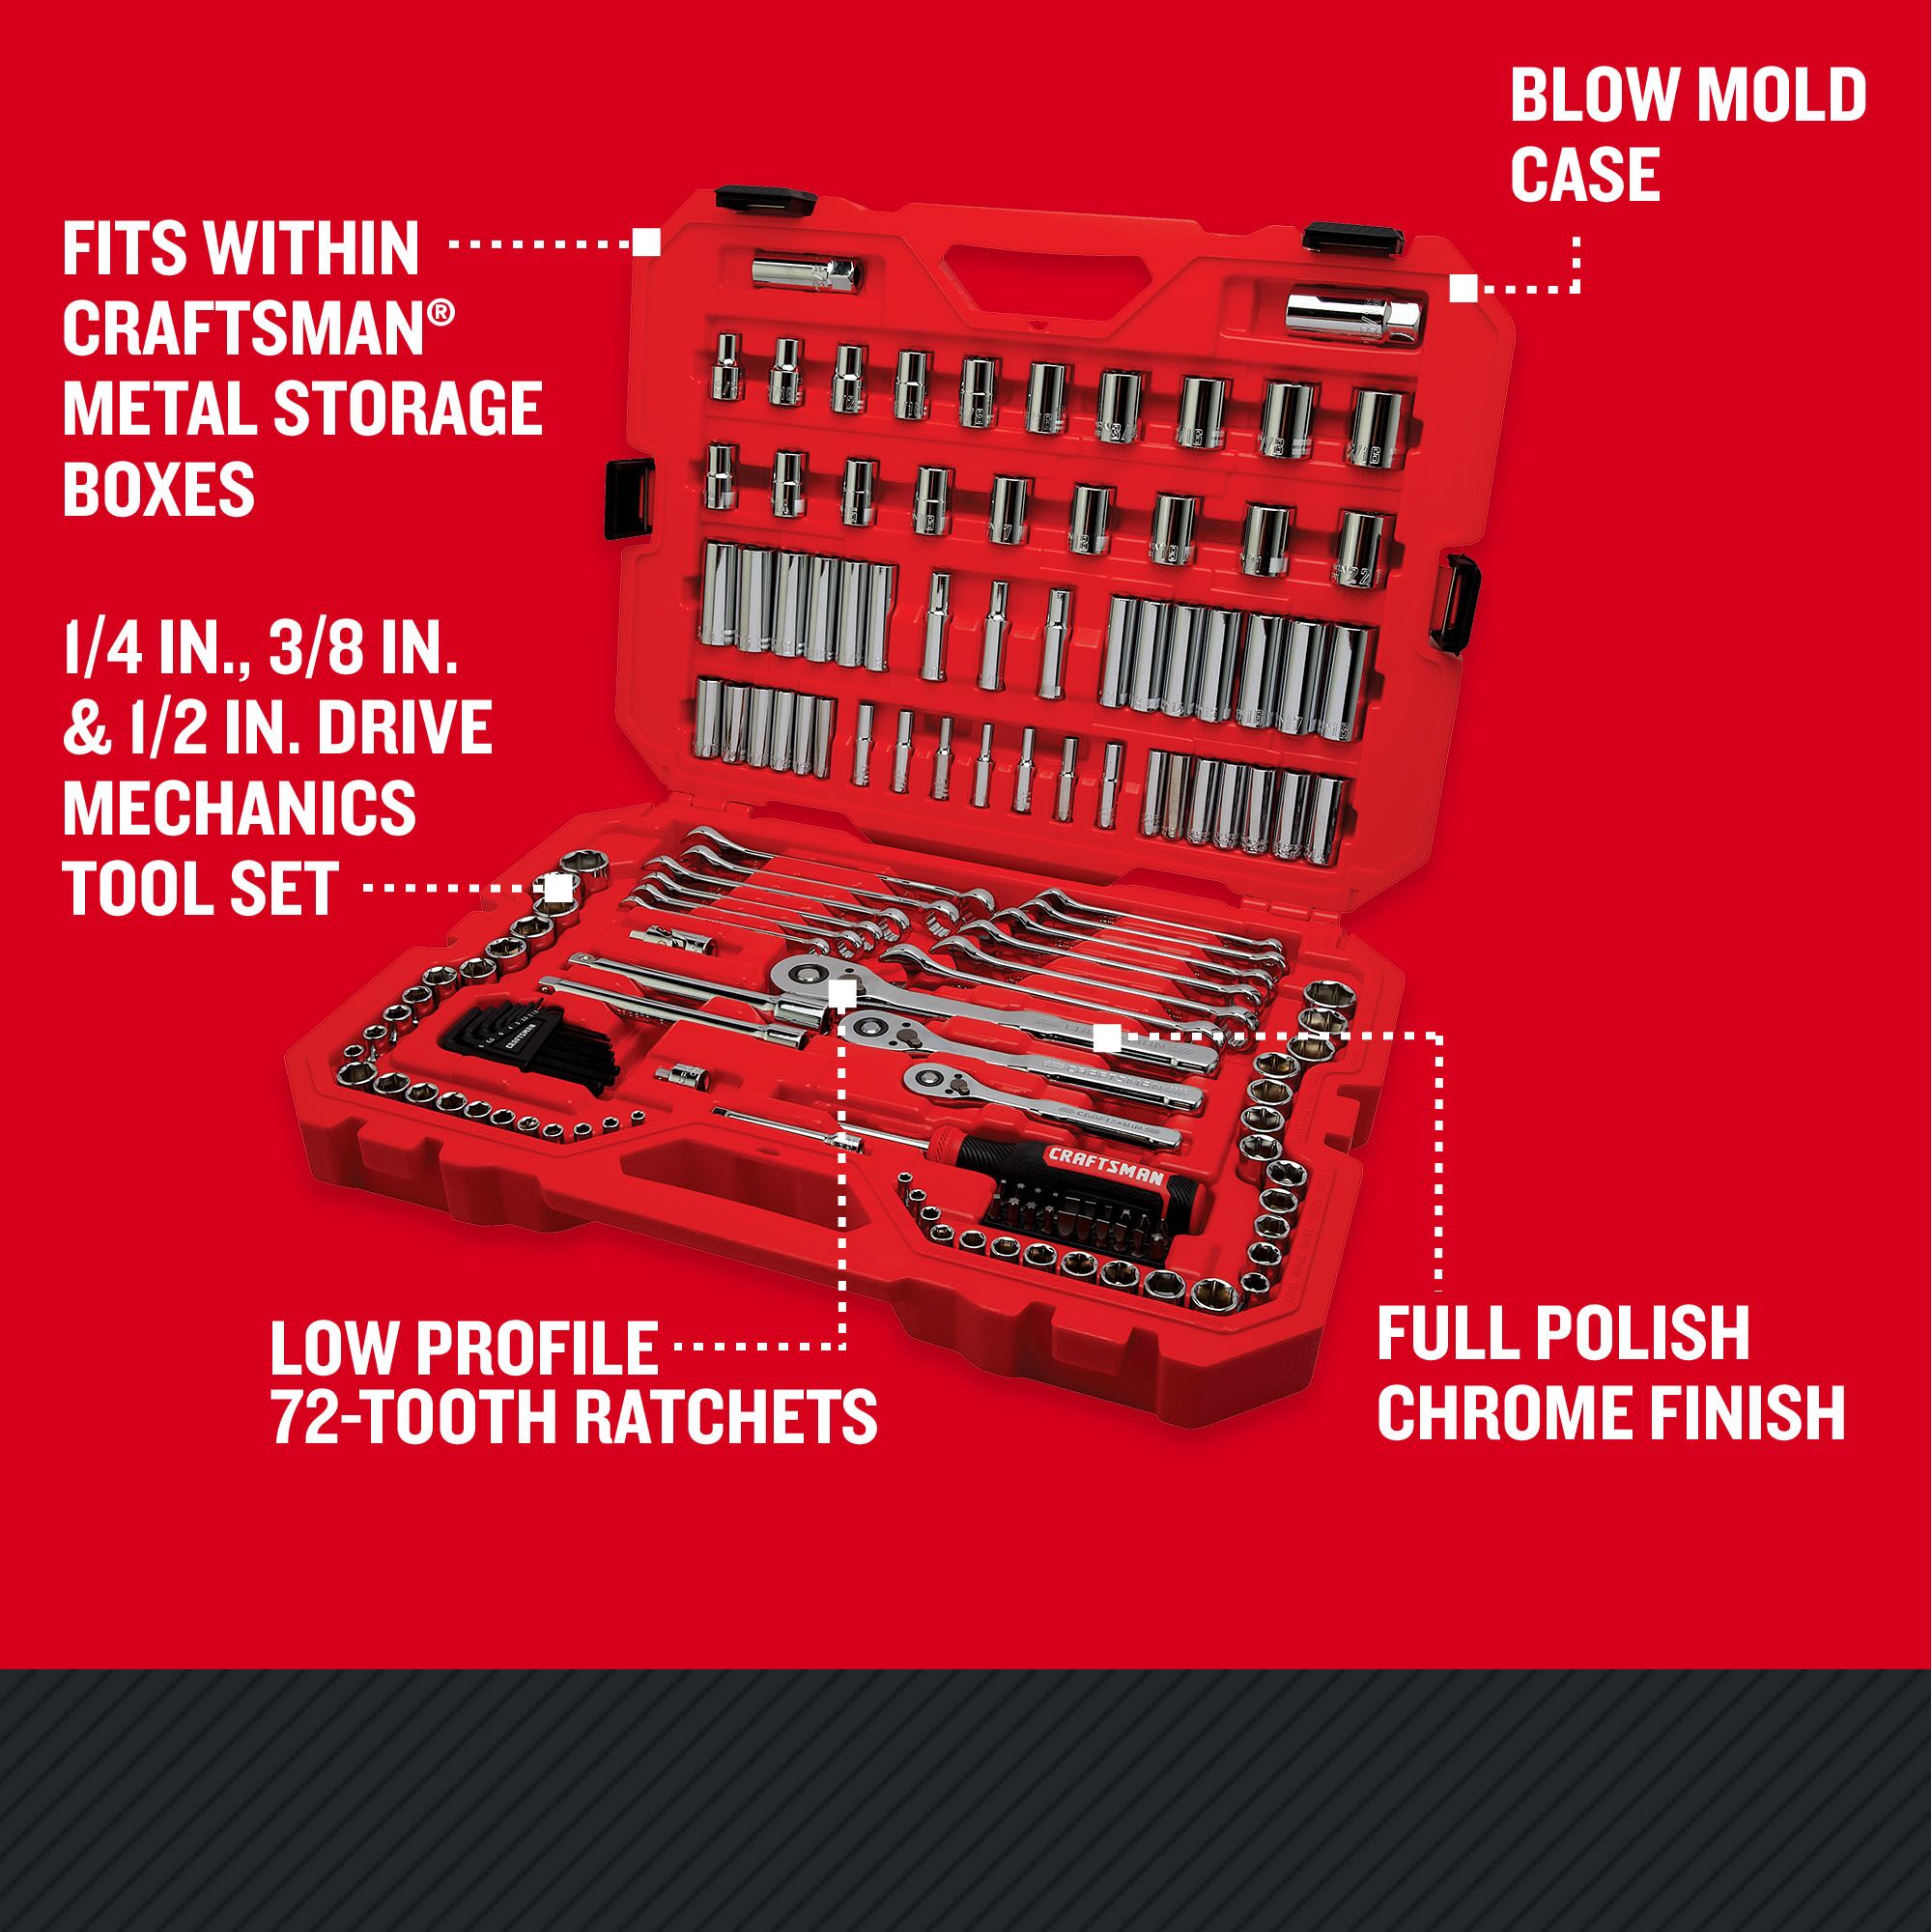 CRAFTSMAN Low Profile 159 piece MECHANICS TOOL SET with features and benefits highlighted